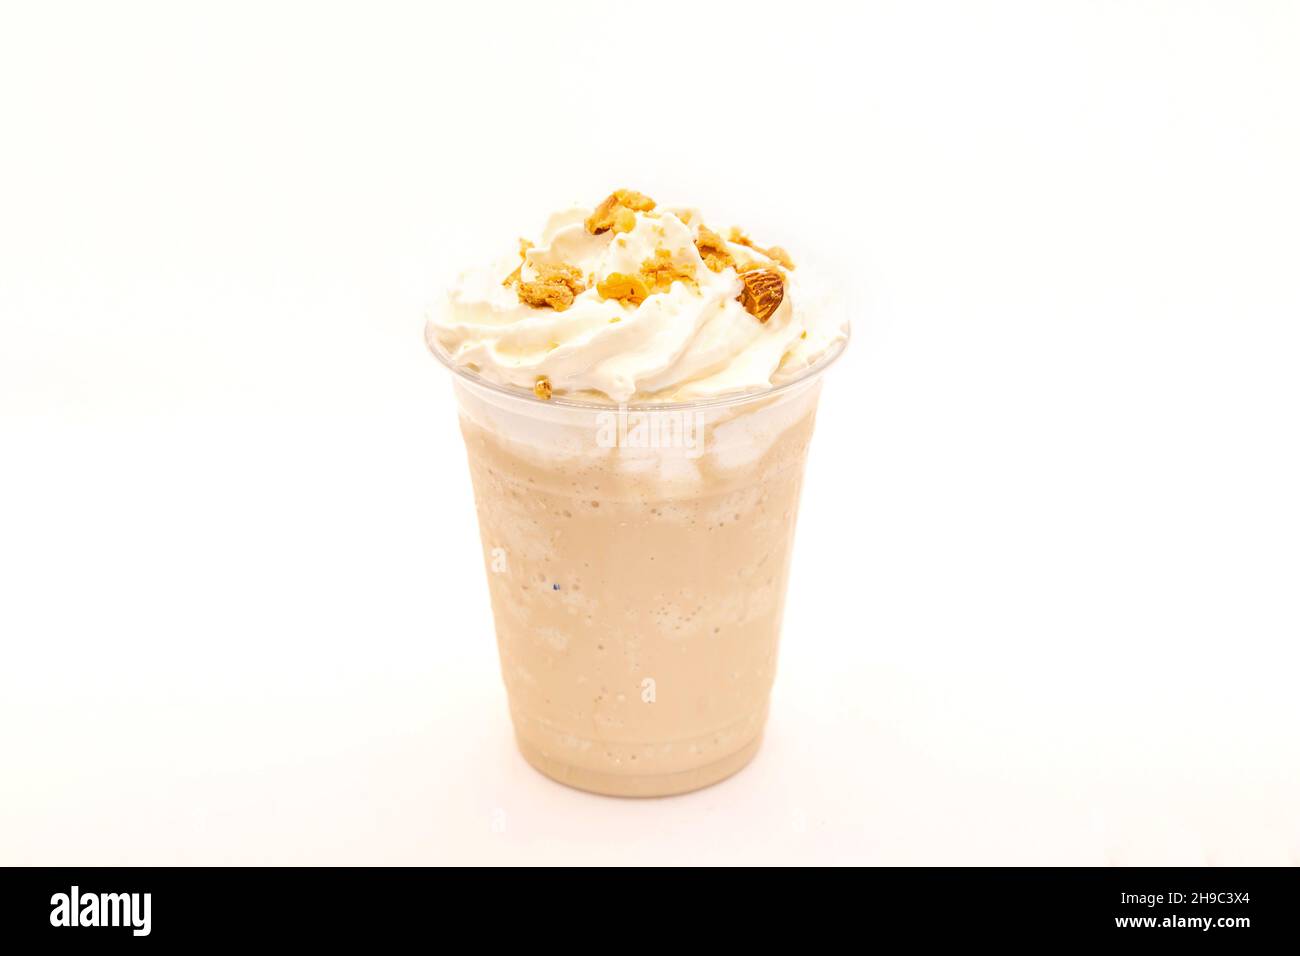 https://c8.alamy.com/comp/2H9C3X4/hazelnut-flavoured-frappe-served-in-a-plastic-cup-with-whipped-cream-and-dressing-2H9C3X4.jpg